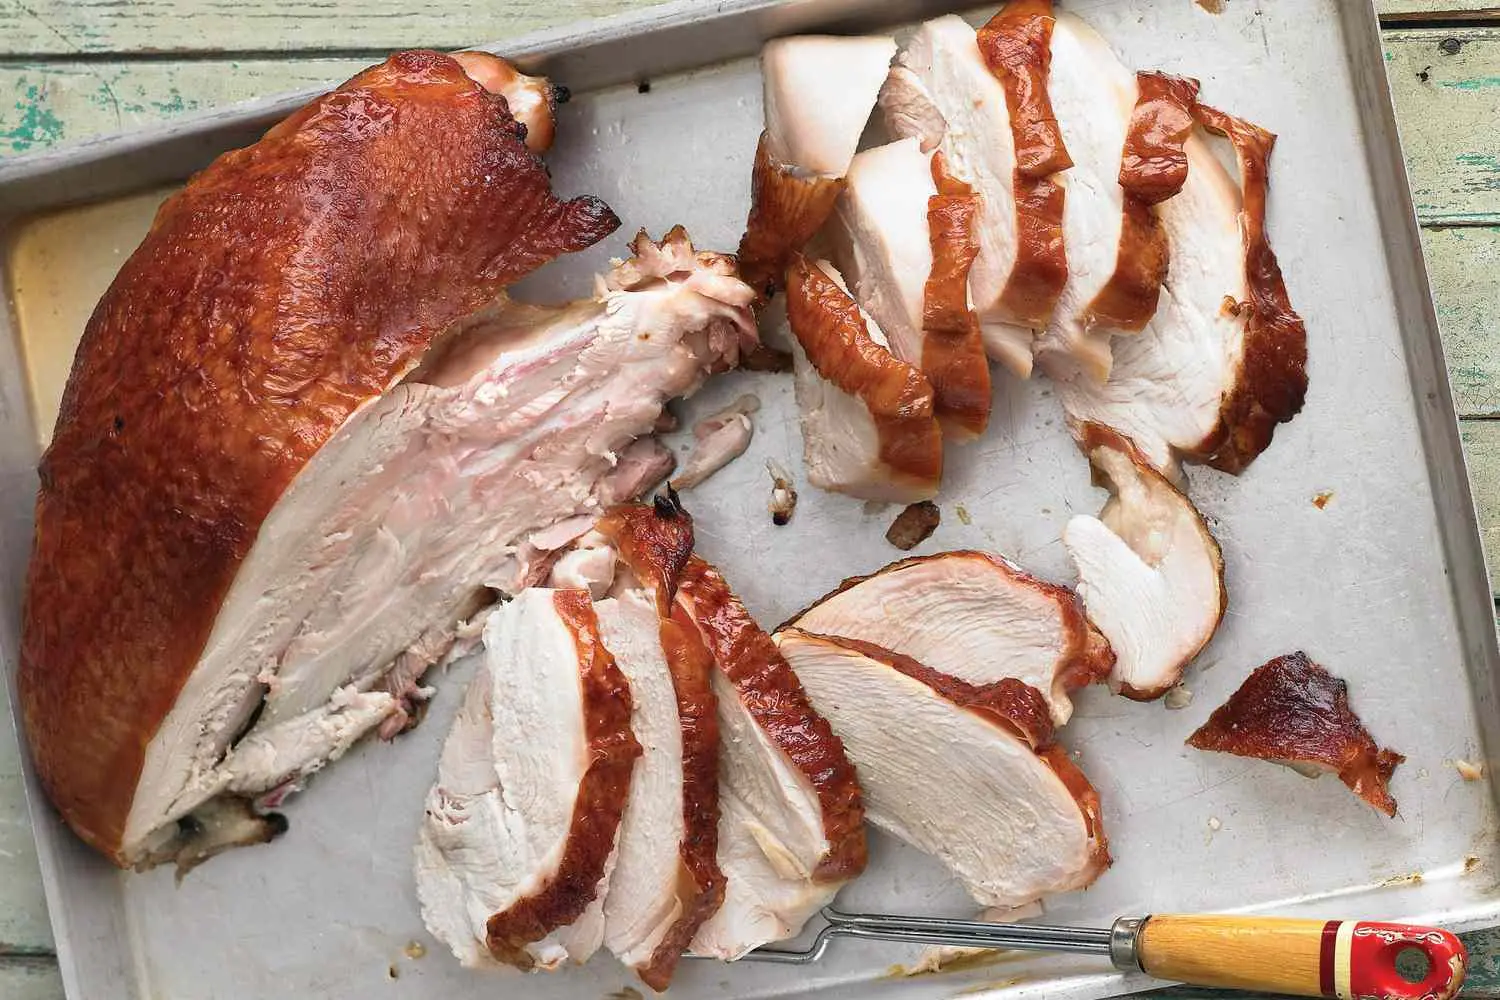 how long does smoked turkey last - Can you eat cooked turkey after 5 days